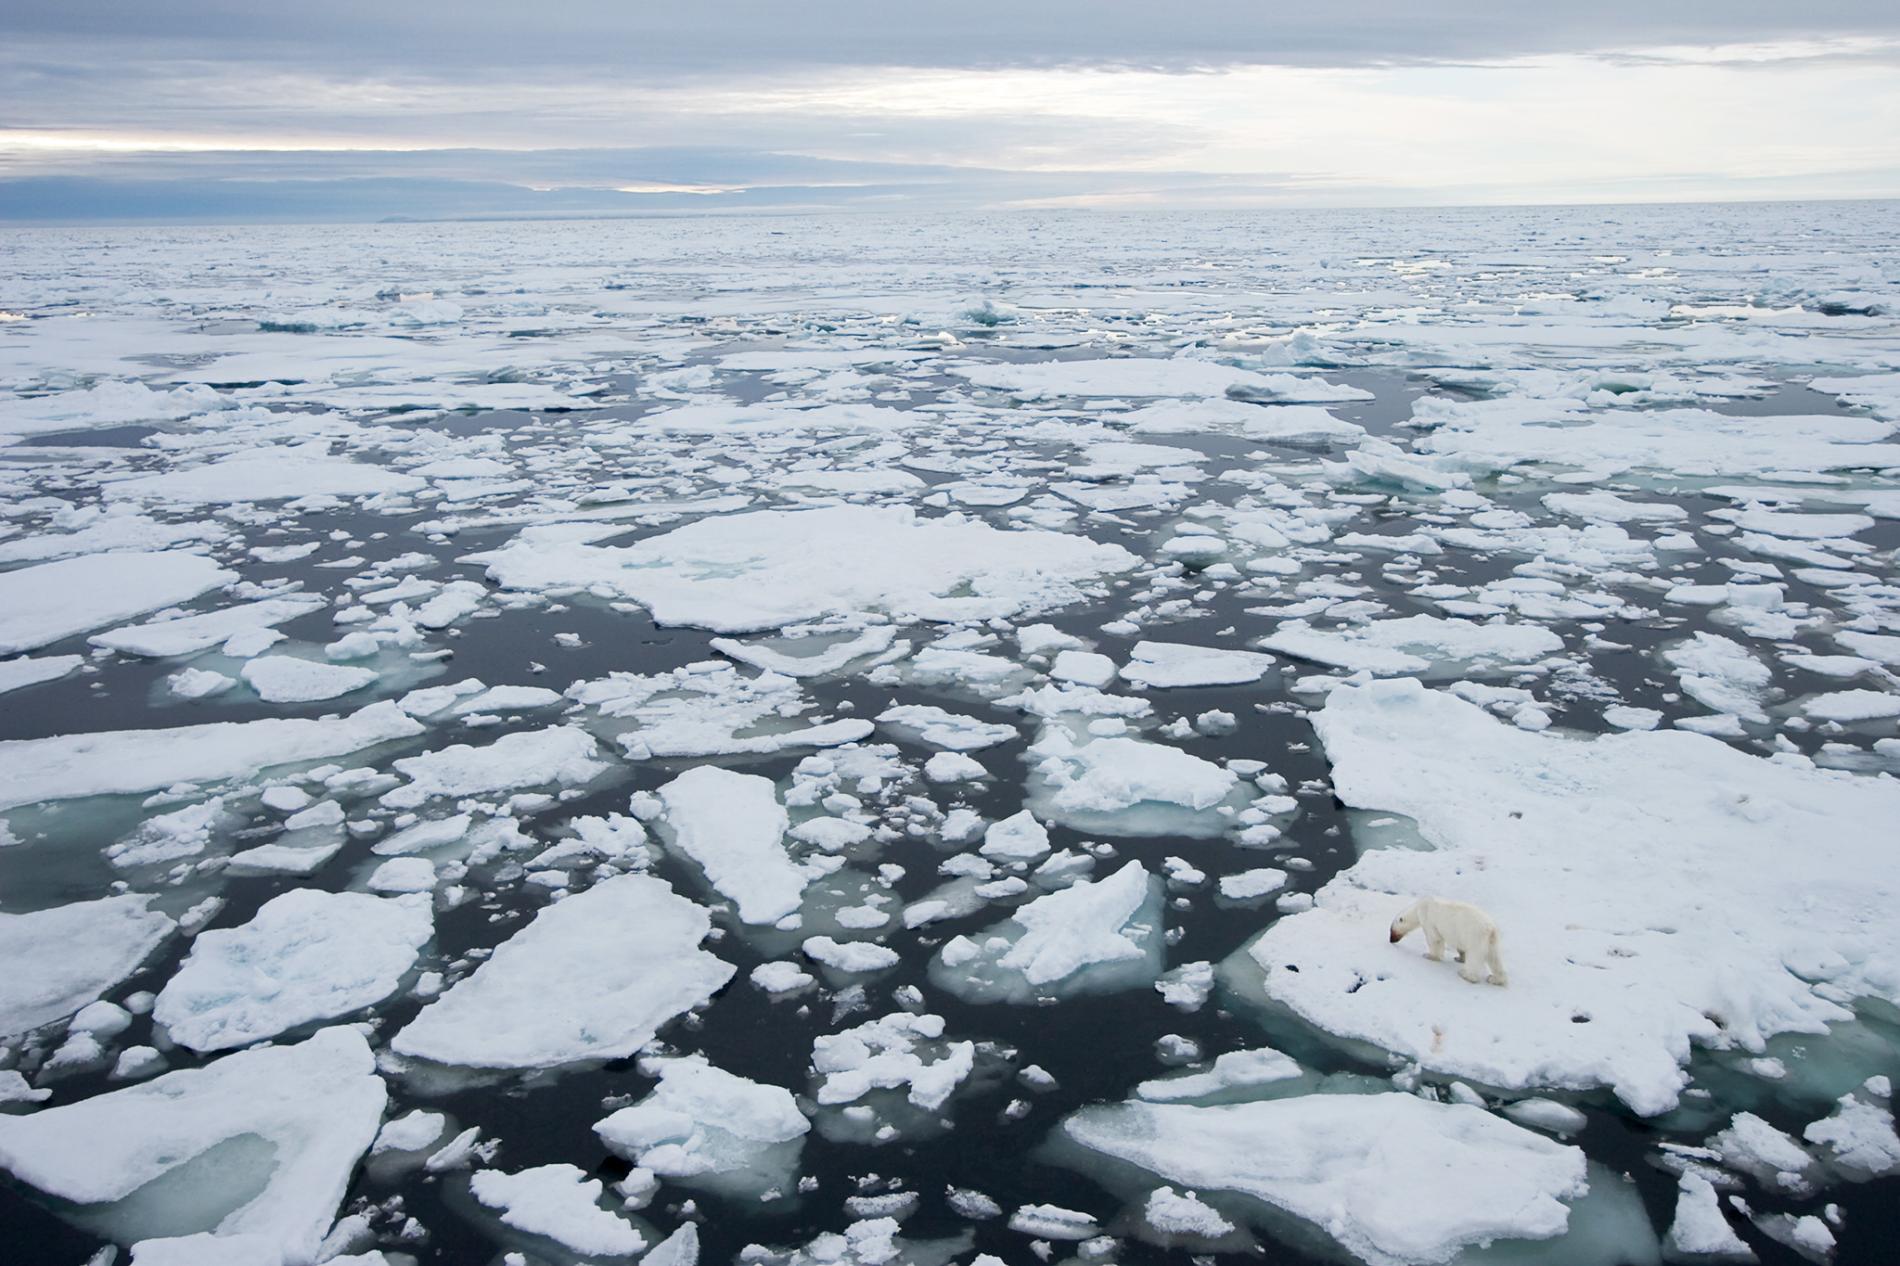 After the Arctic Ice Melts | Hon. Fran Ulmer